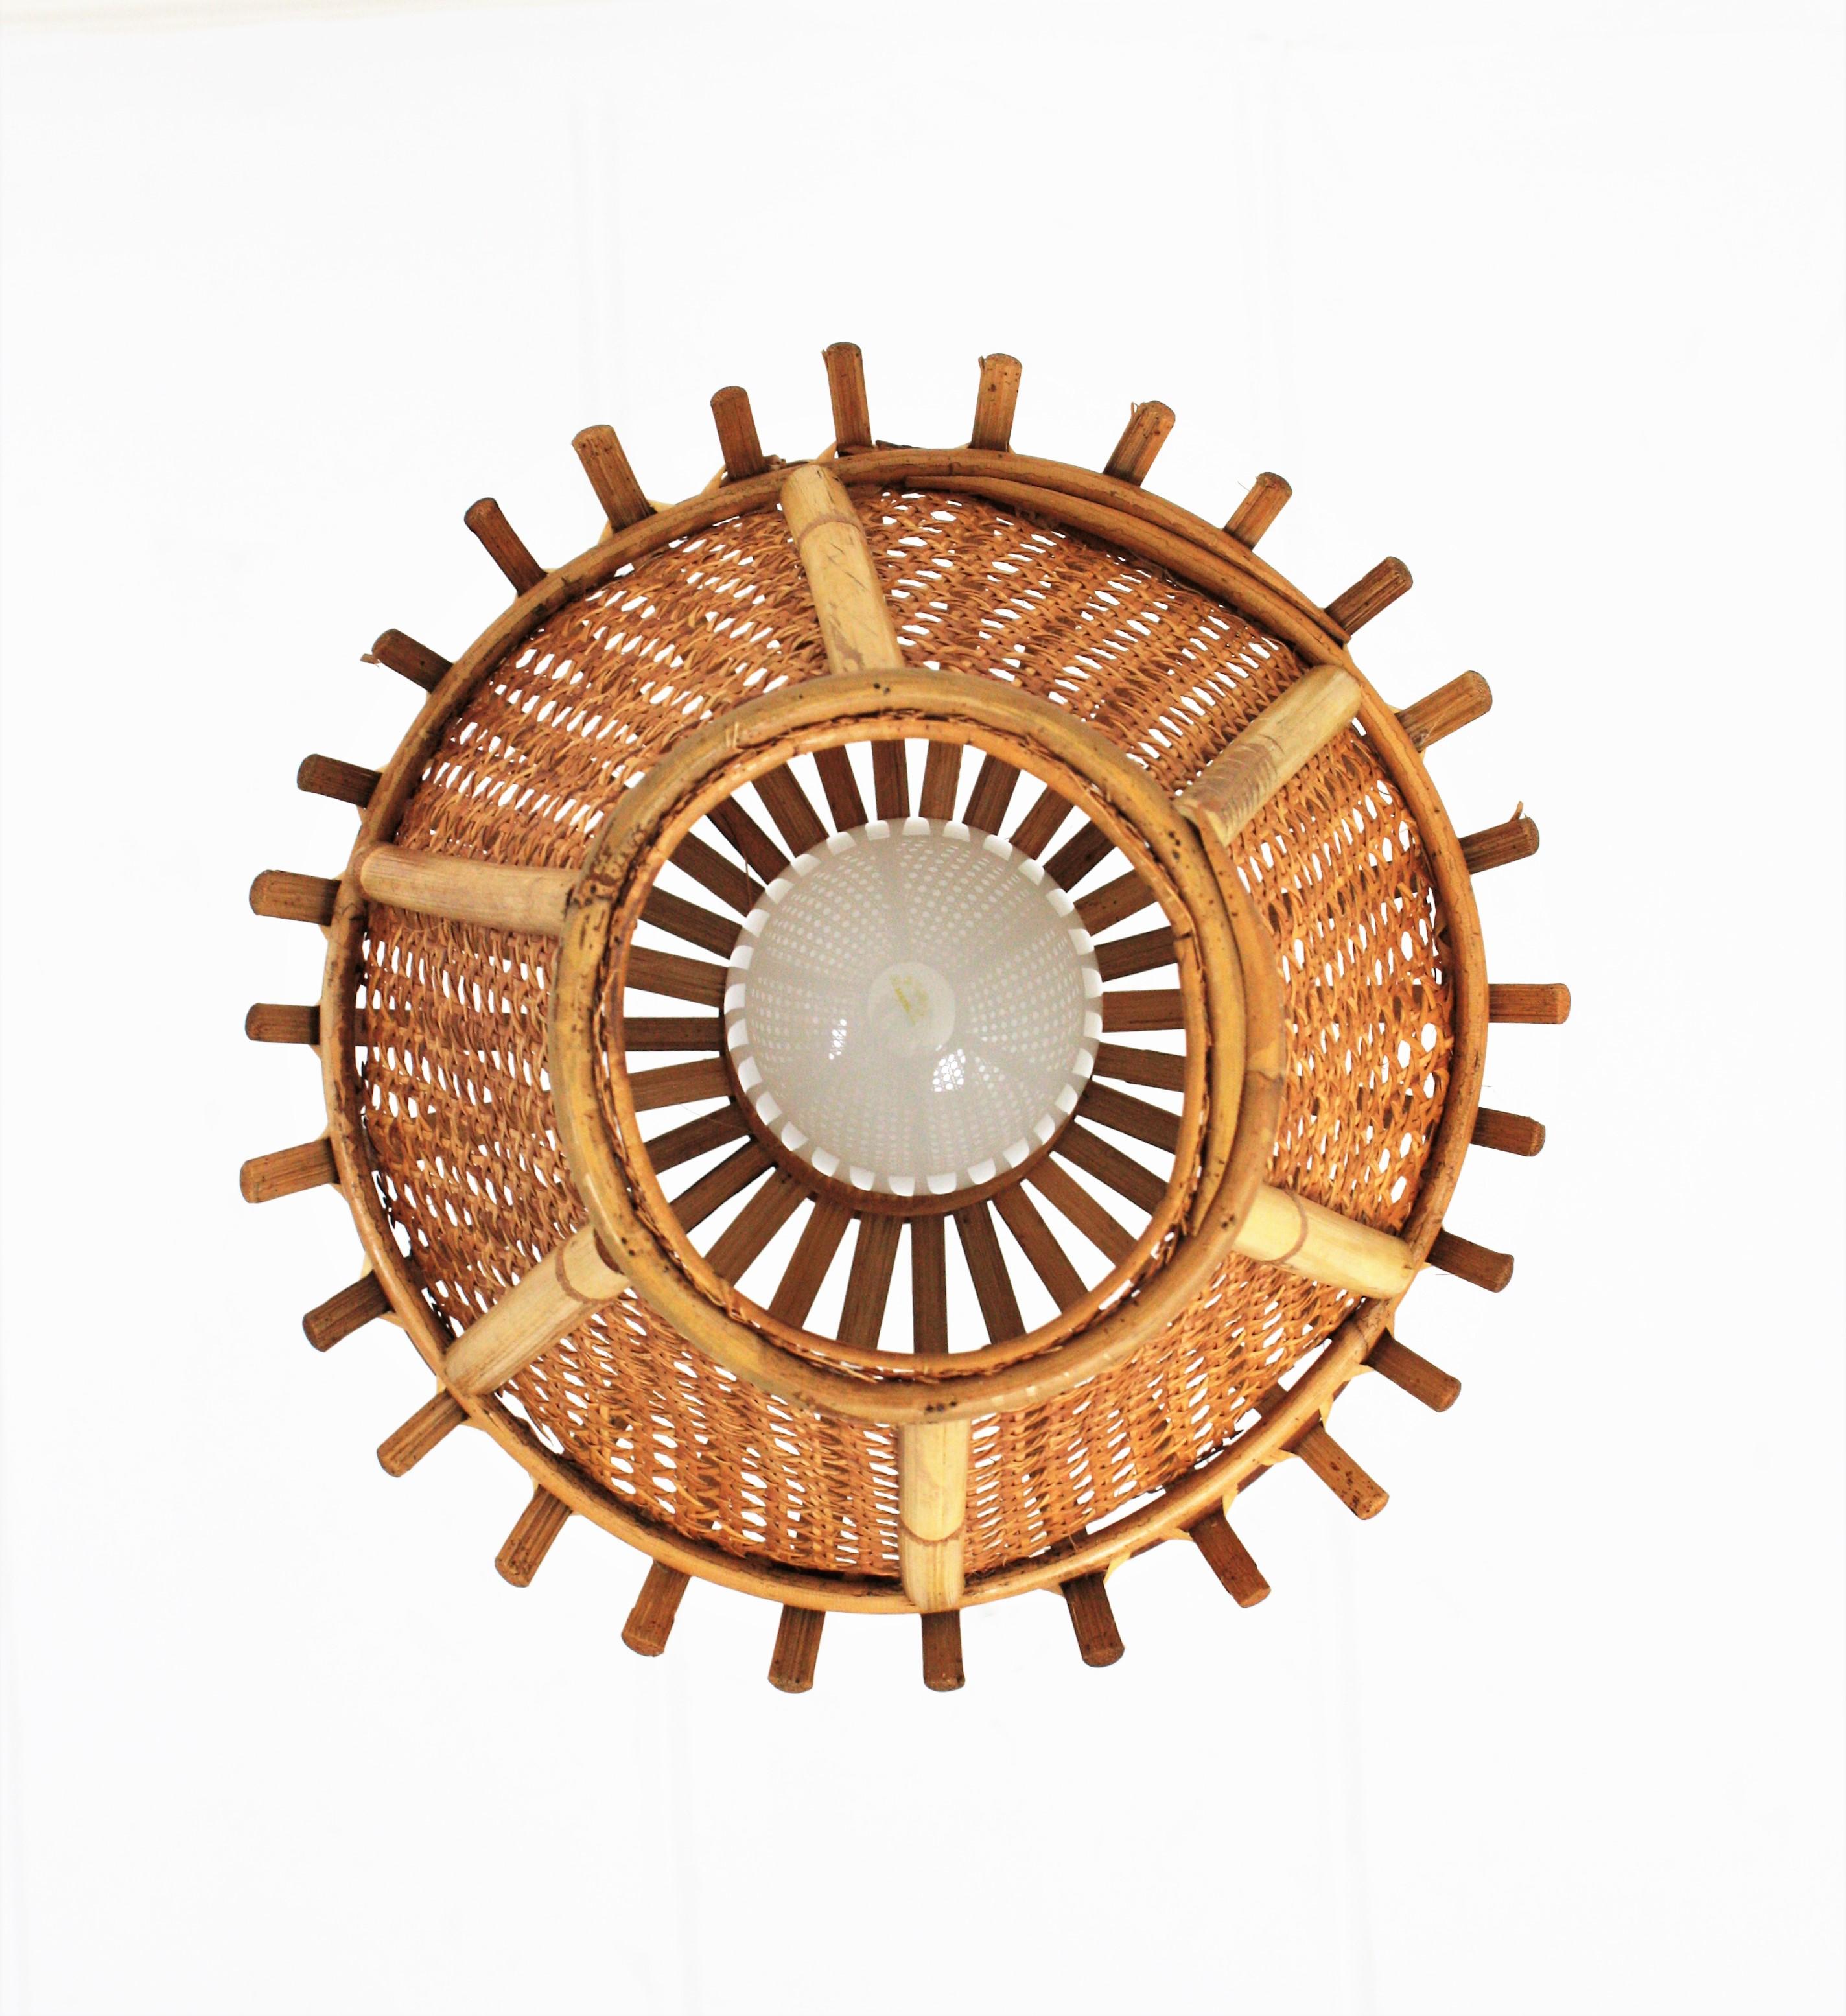 Italian Modernist Rattan and Wicker Wire Pagoda Pendant Hanging Light, 1960s For Sale 5